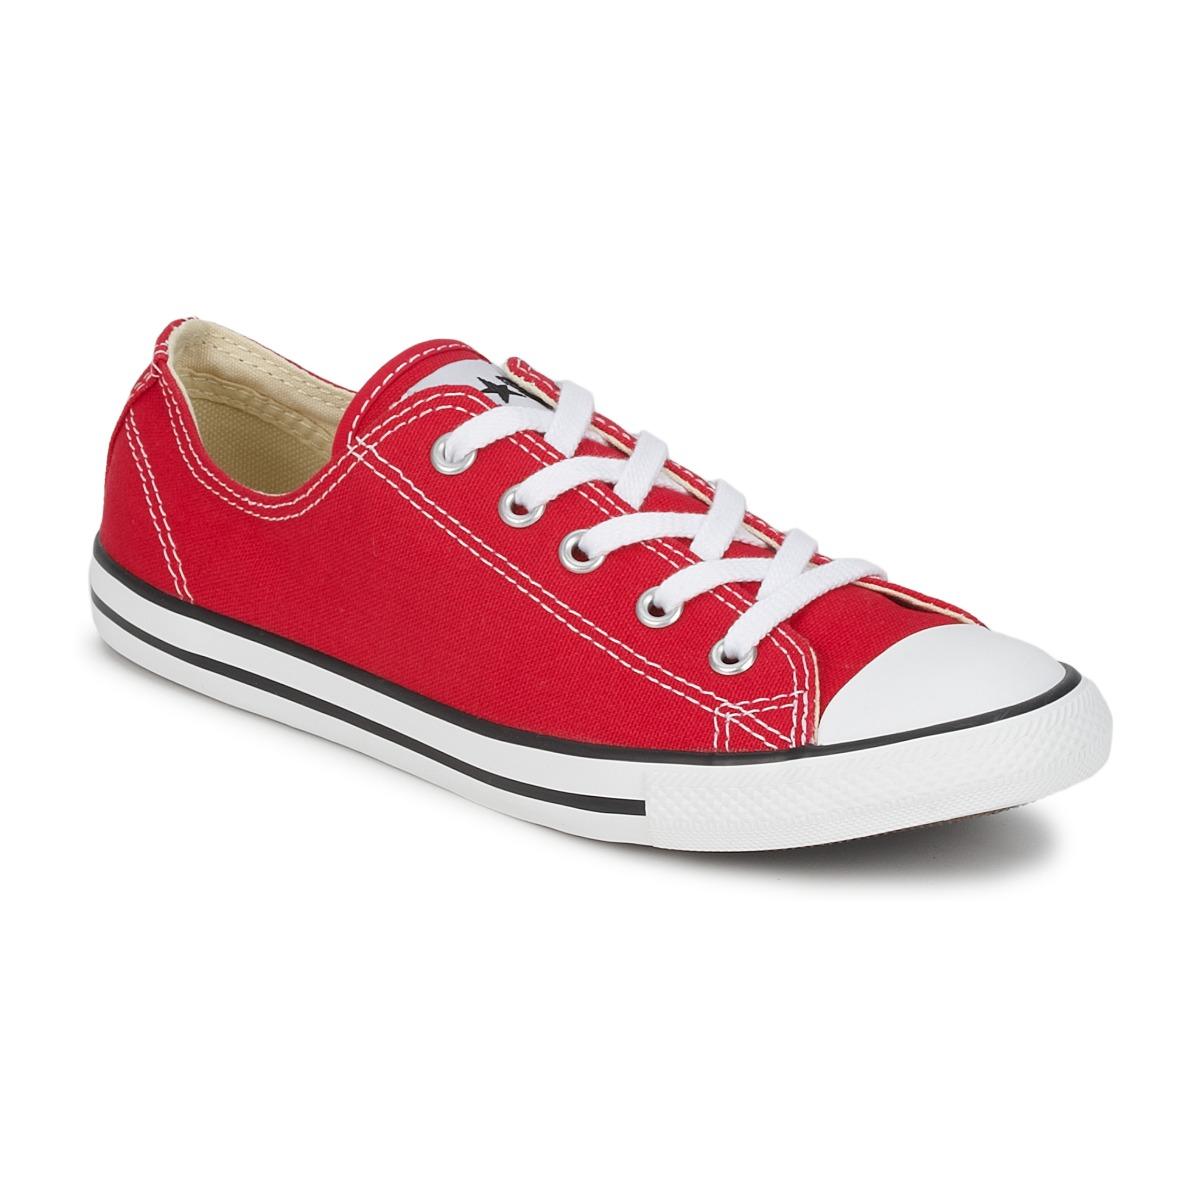 Converse All Star Dainty Ox Women's Shoes (trainers) In Red - Lyst